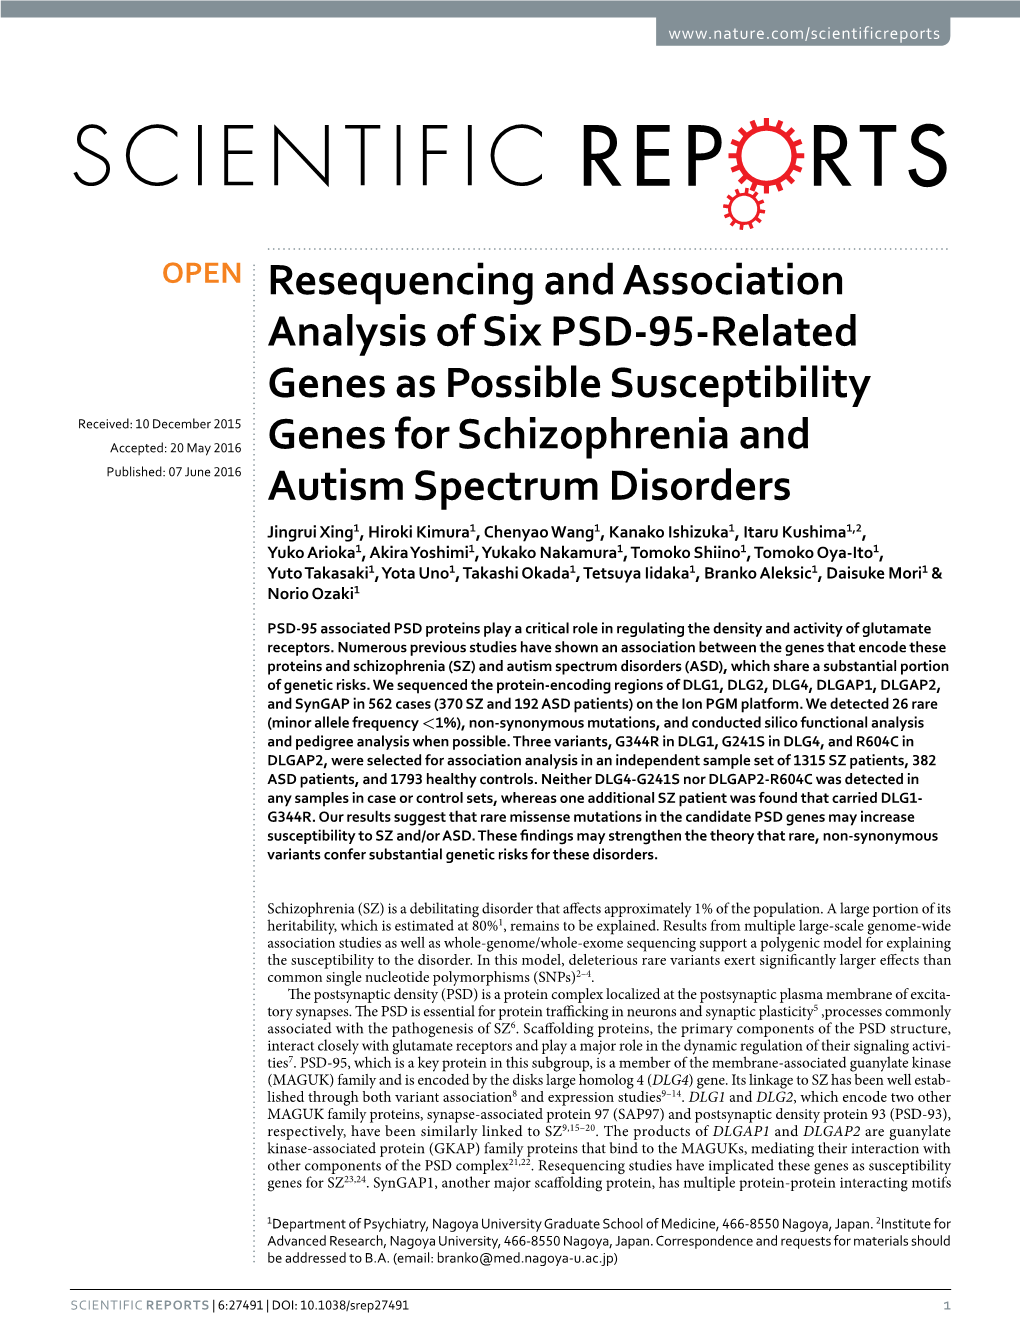 Resequencing and Association Analysis of Six PSD-95-Related